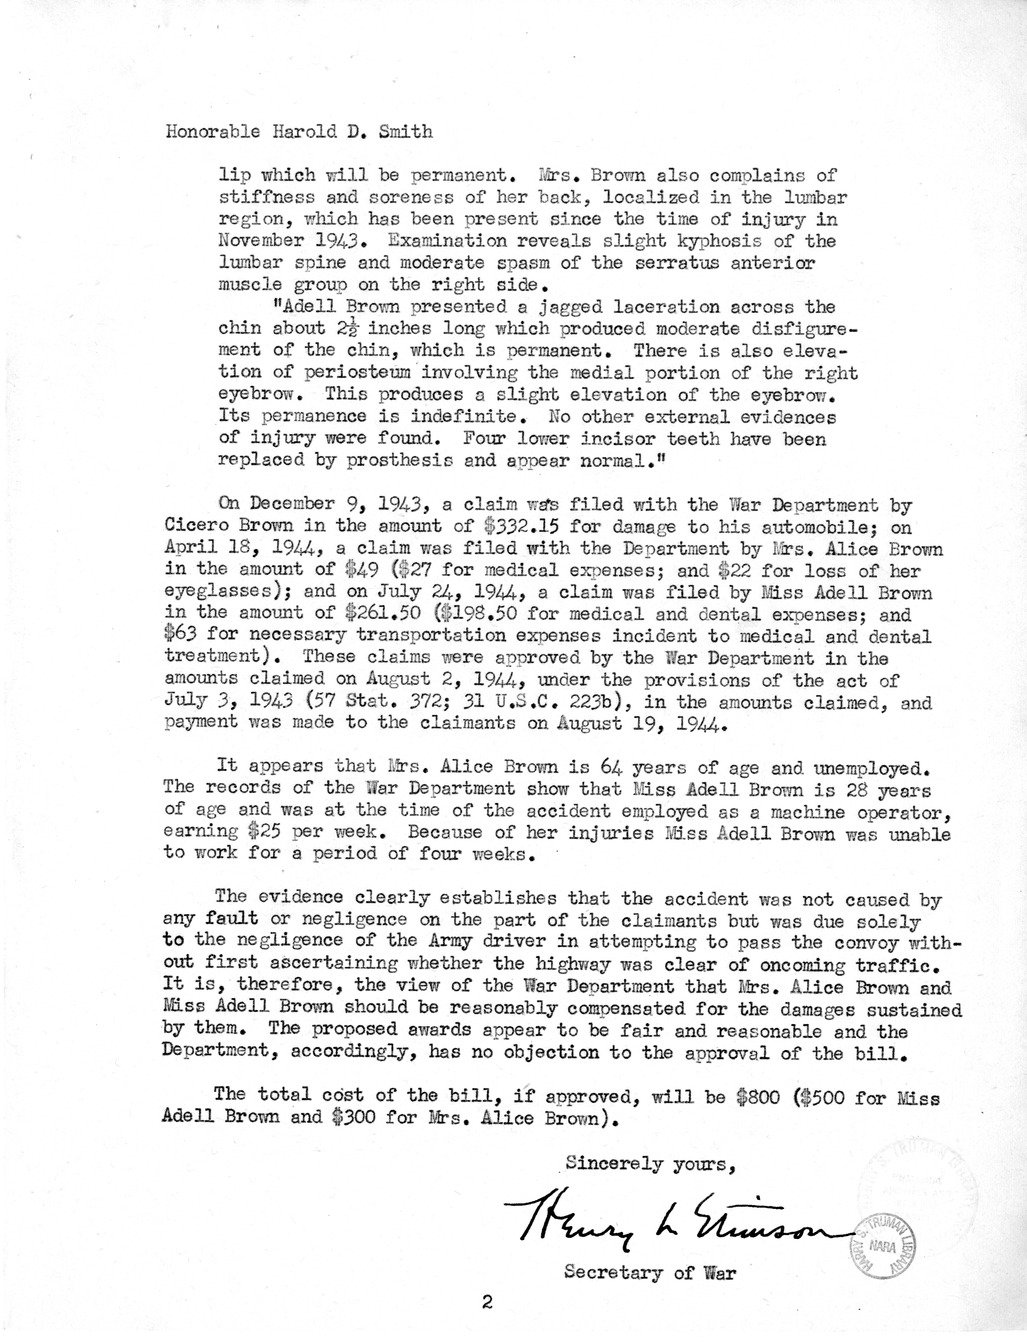 Memorandum from Frederick J. Bailey to M. C. Latta, H.R. 244, For the Relief of Adell Brown and Alice Brown, with Attachments